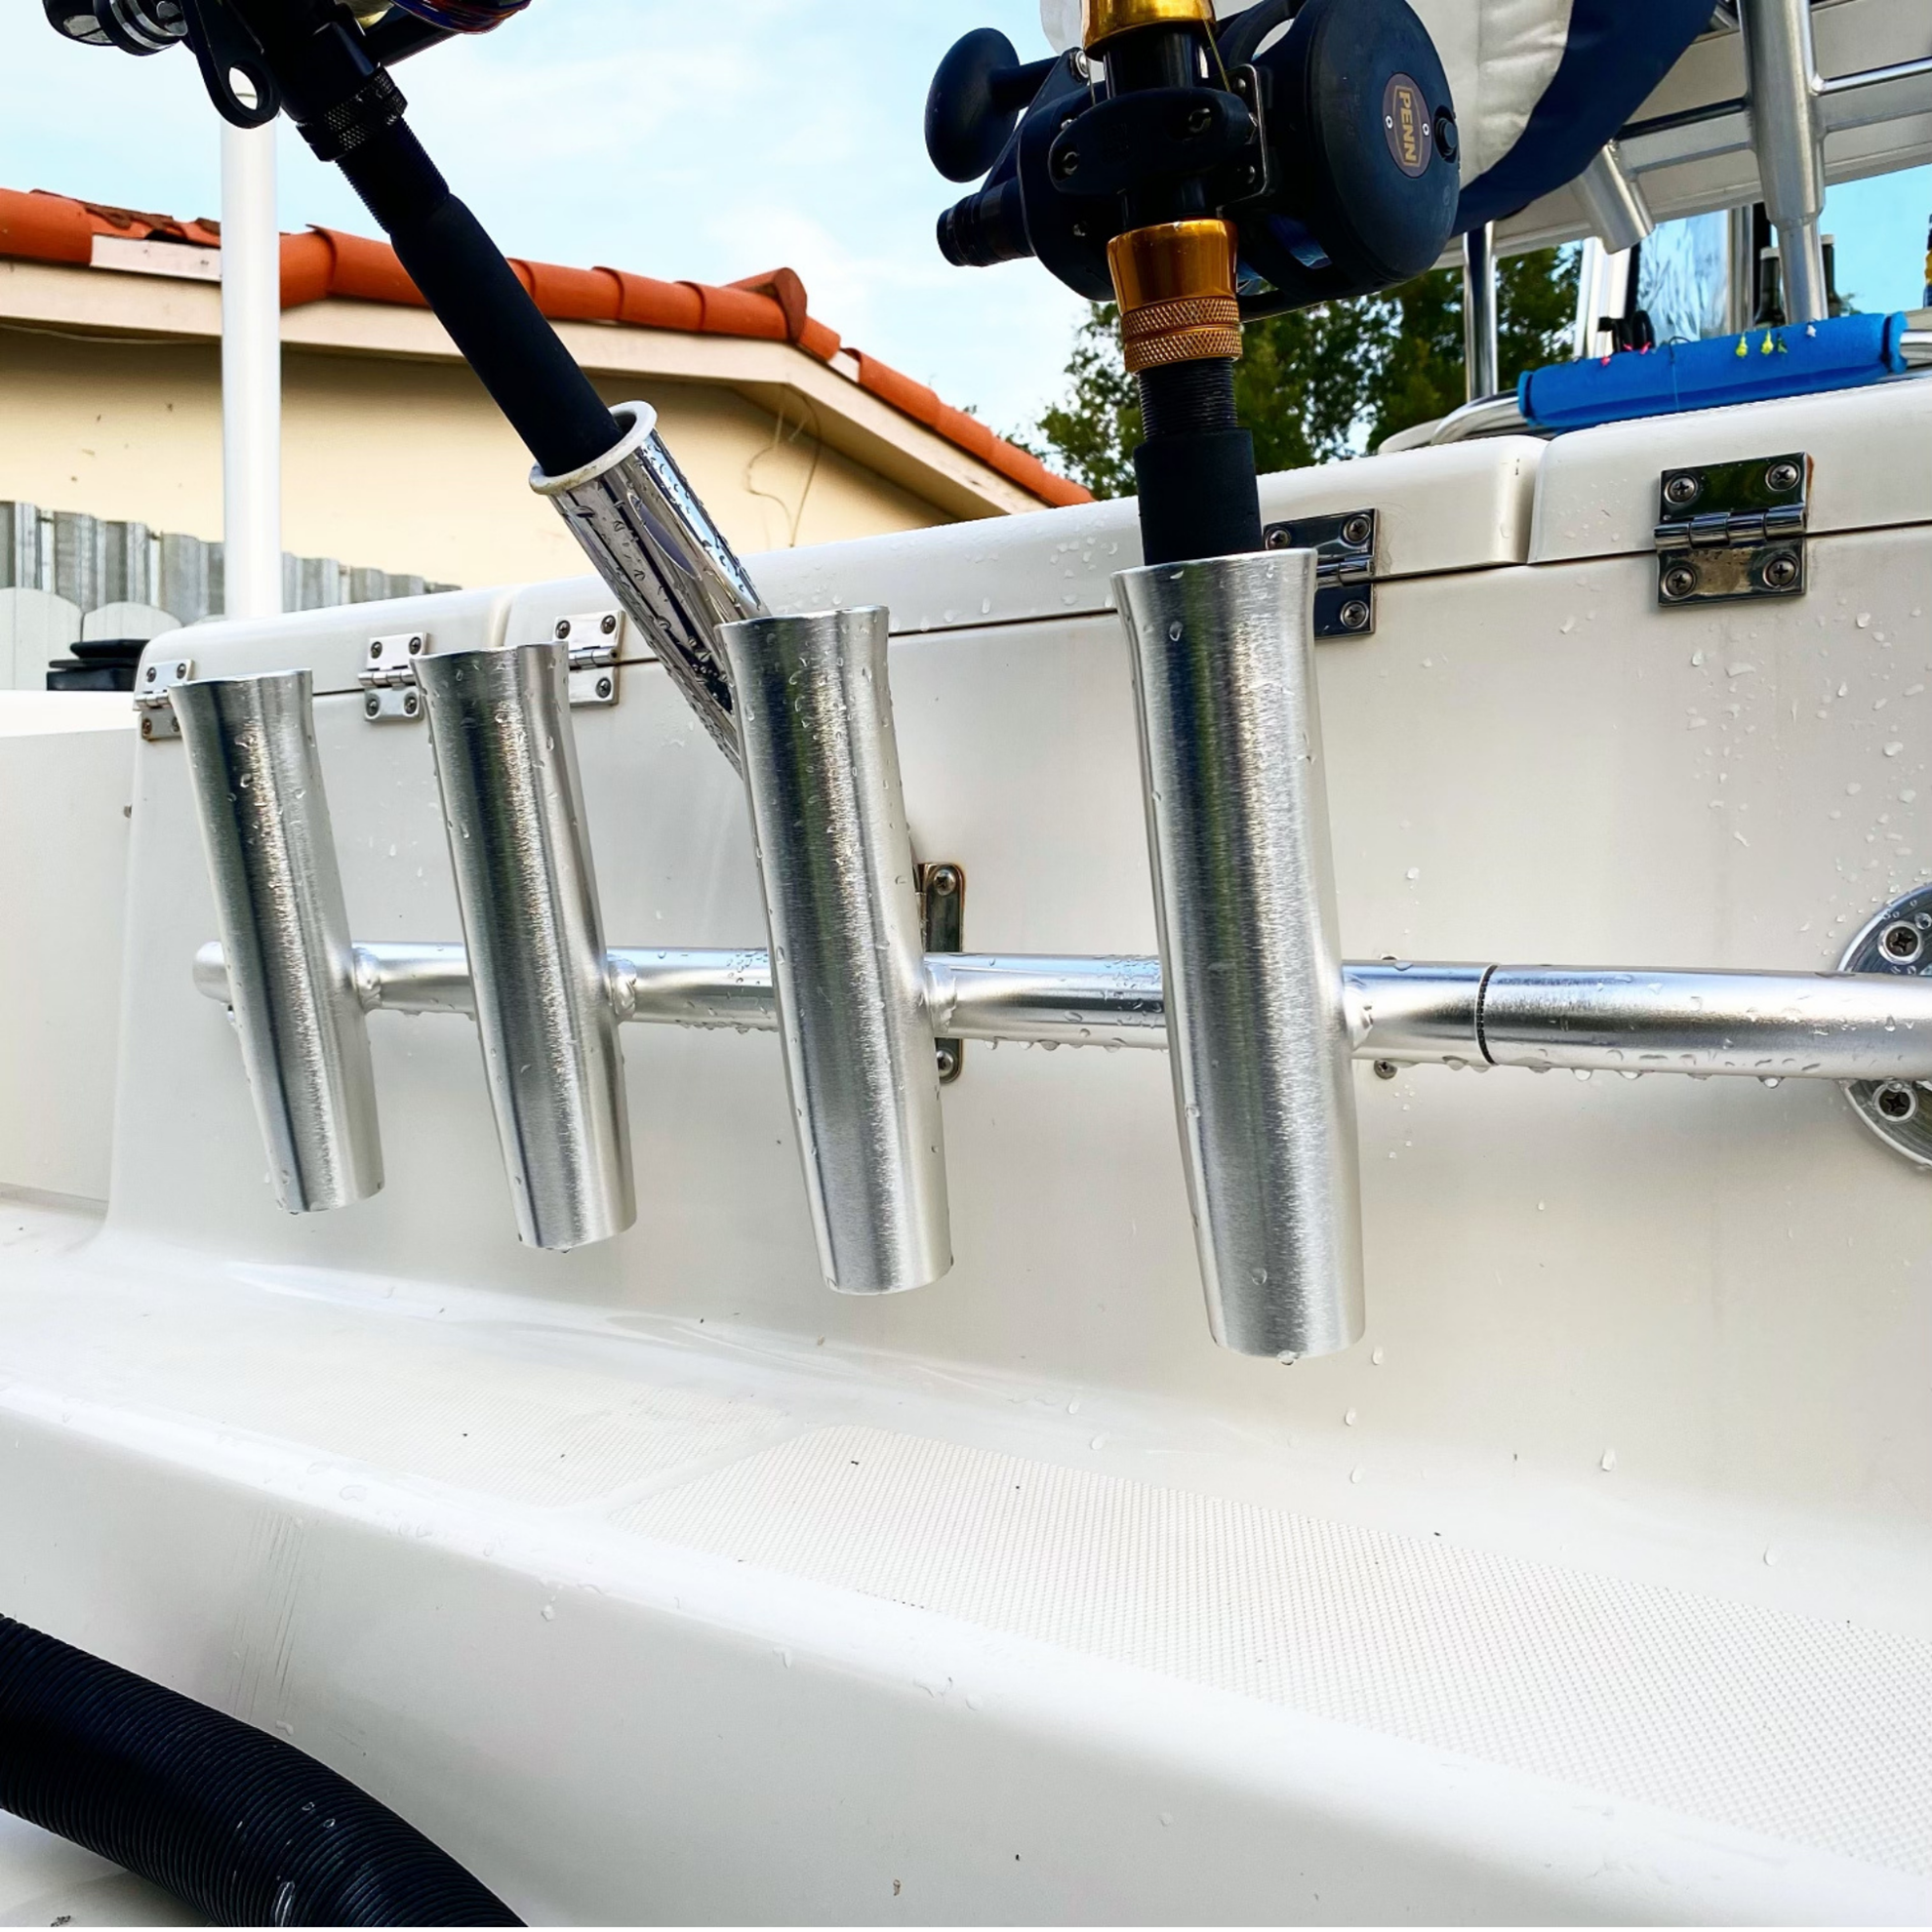 Wall mountig rod holder - Rod holders and Accessories - MTO Nautica Store